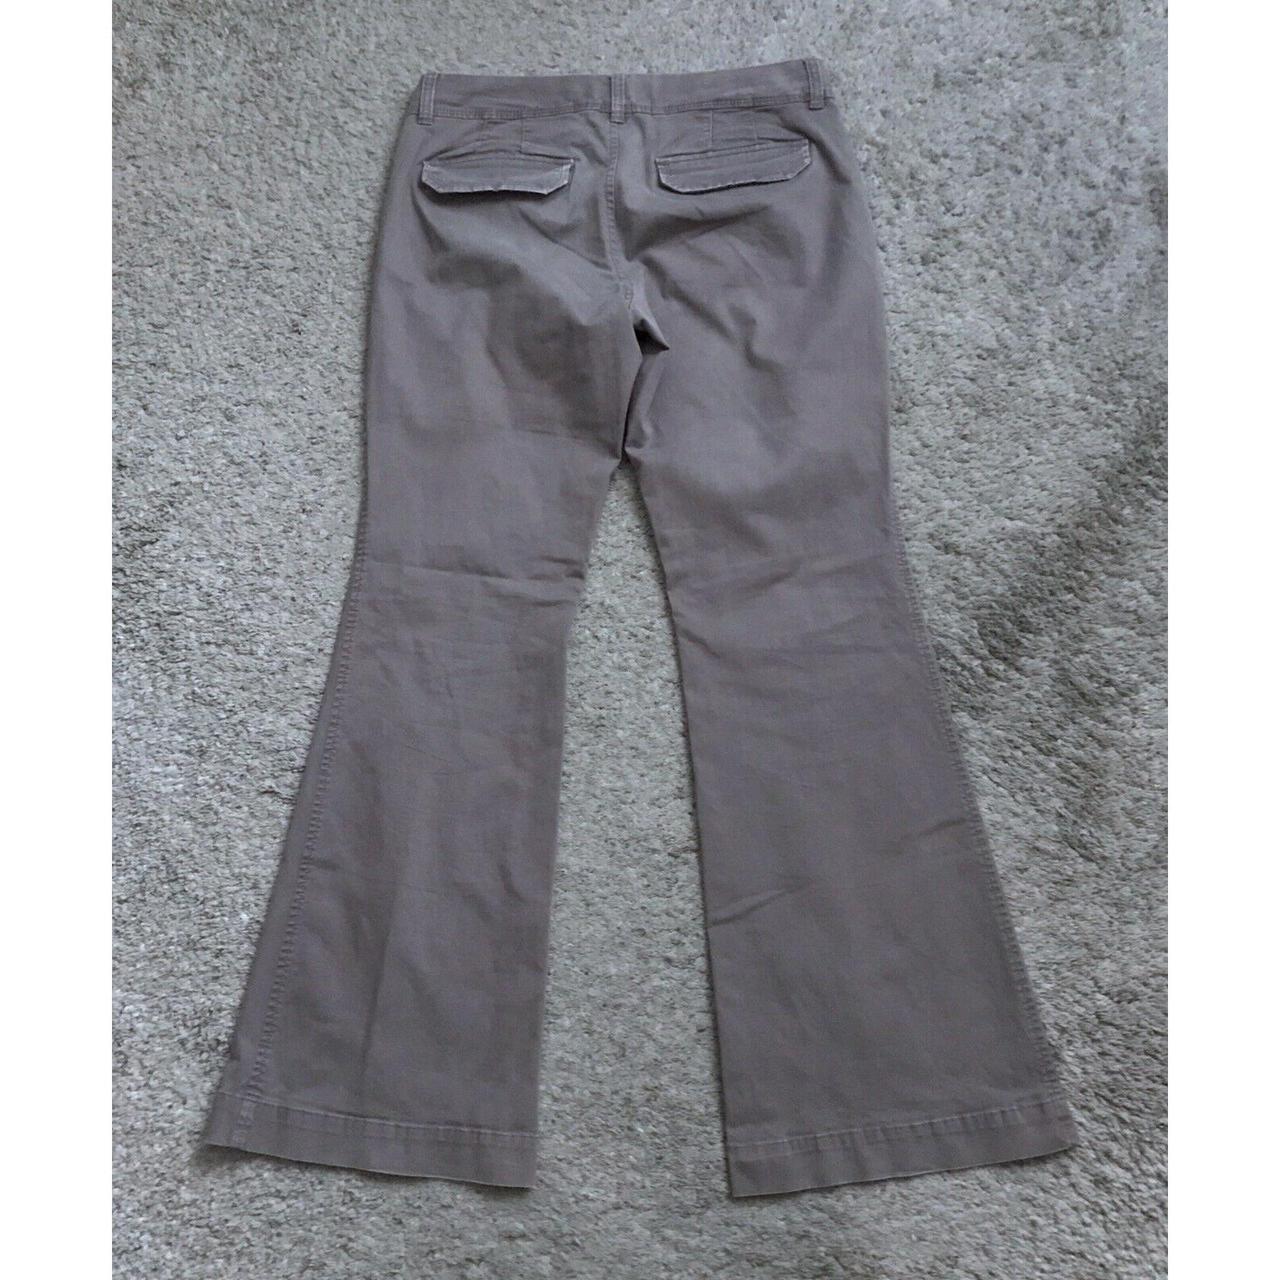 Product Image 2 - OLD NAVY Womens Size 6